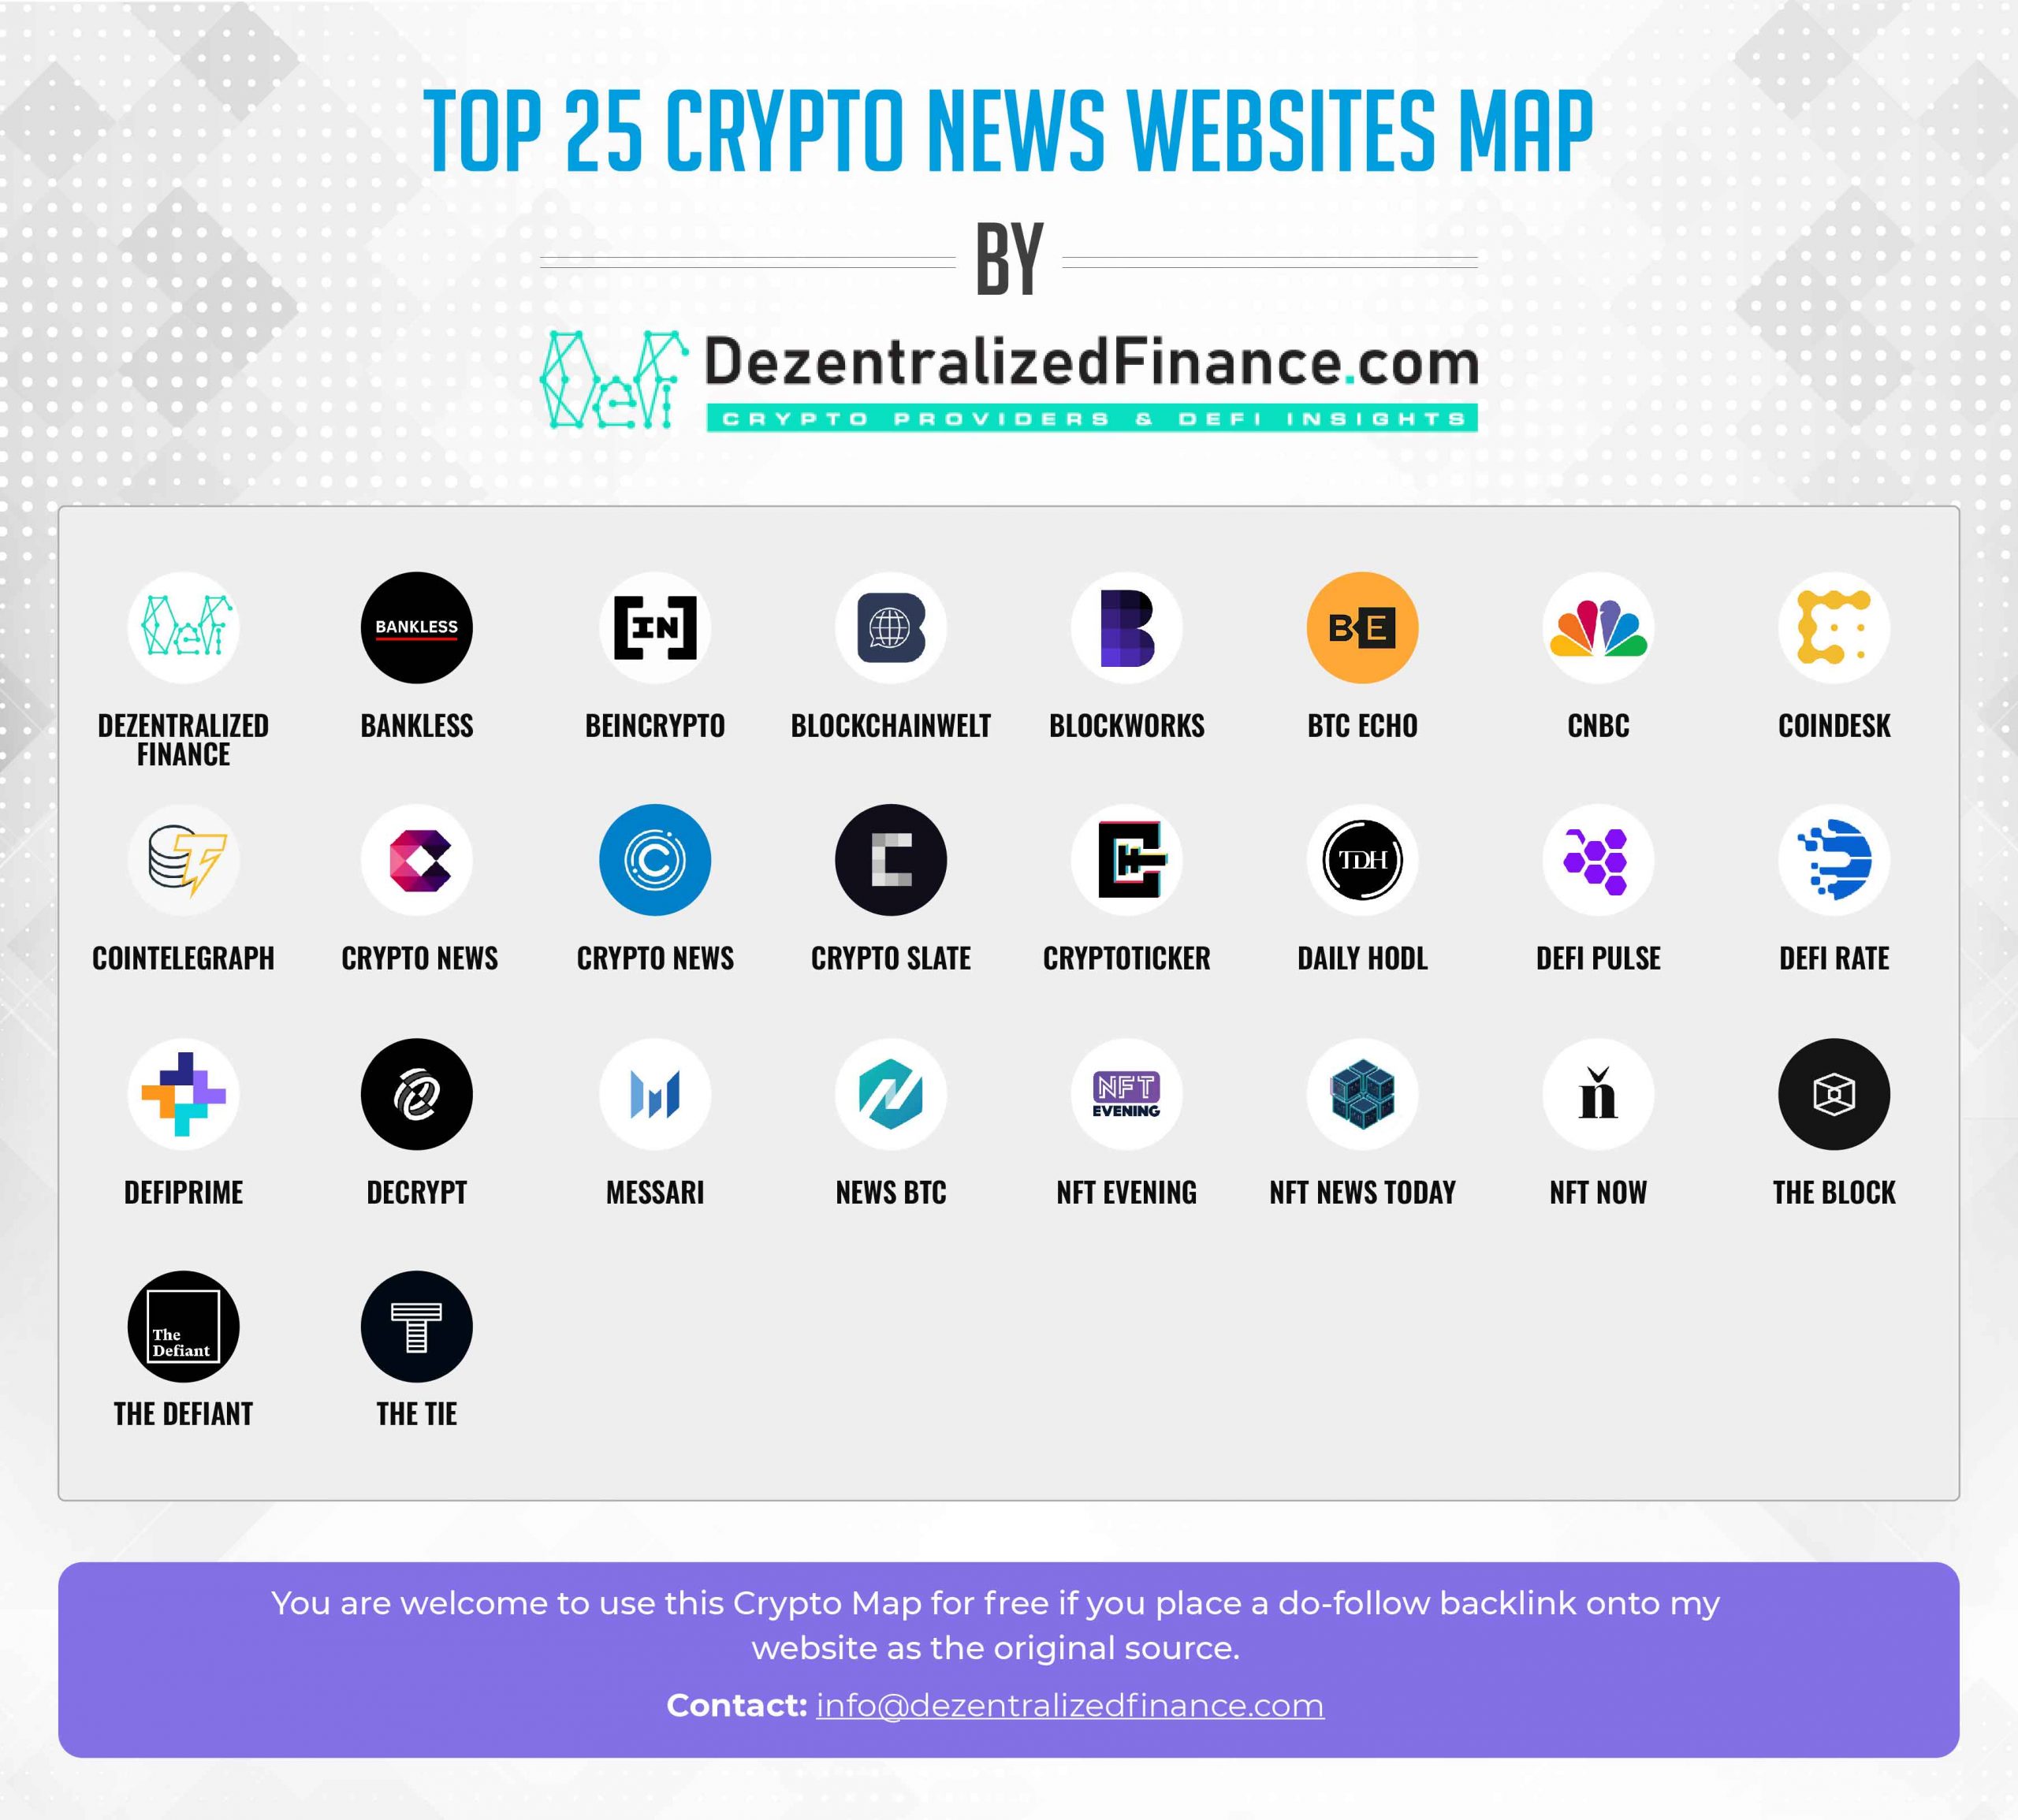 Top 25 Crypto News Websites scaled